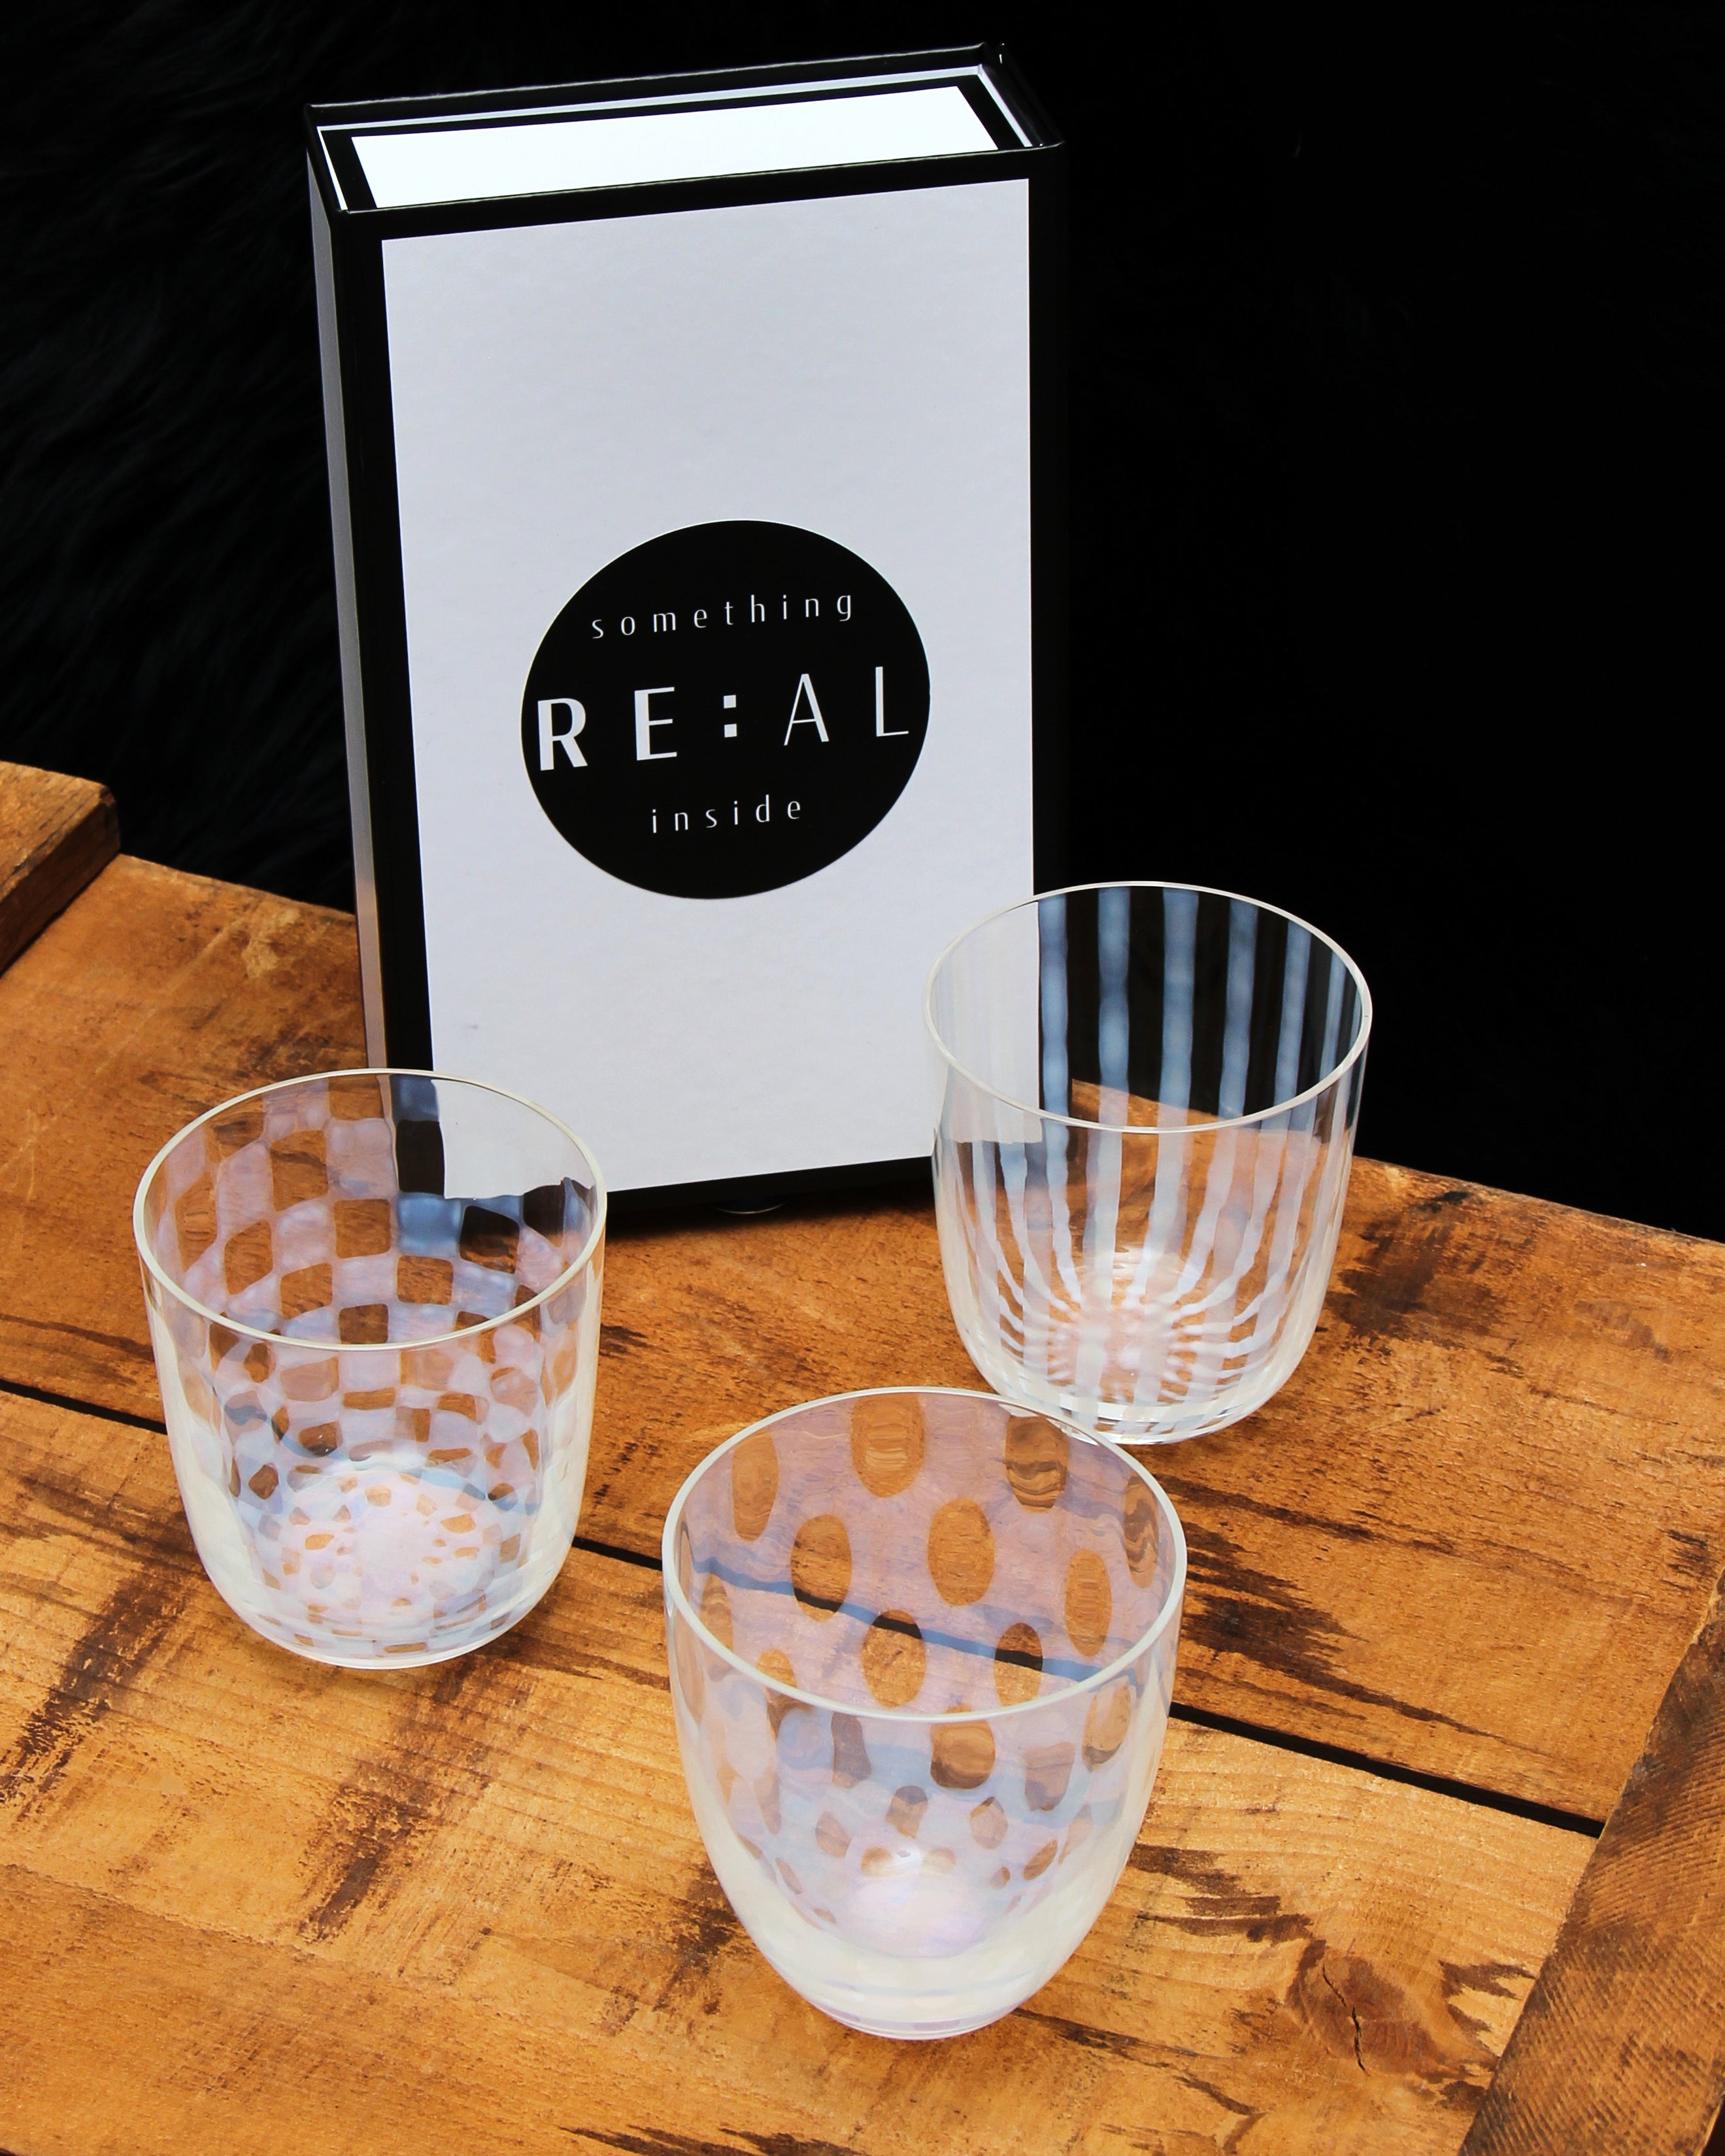 WINTER SALE 15% OFF - JAPANESE CHECKERBOARD GLASS